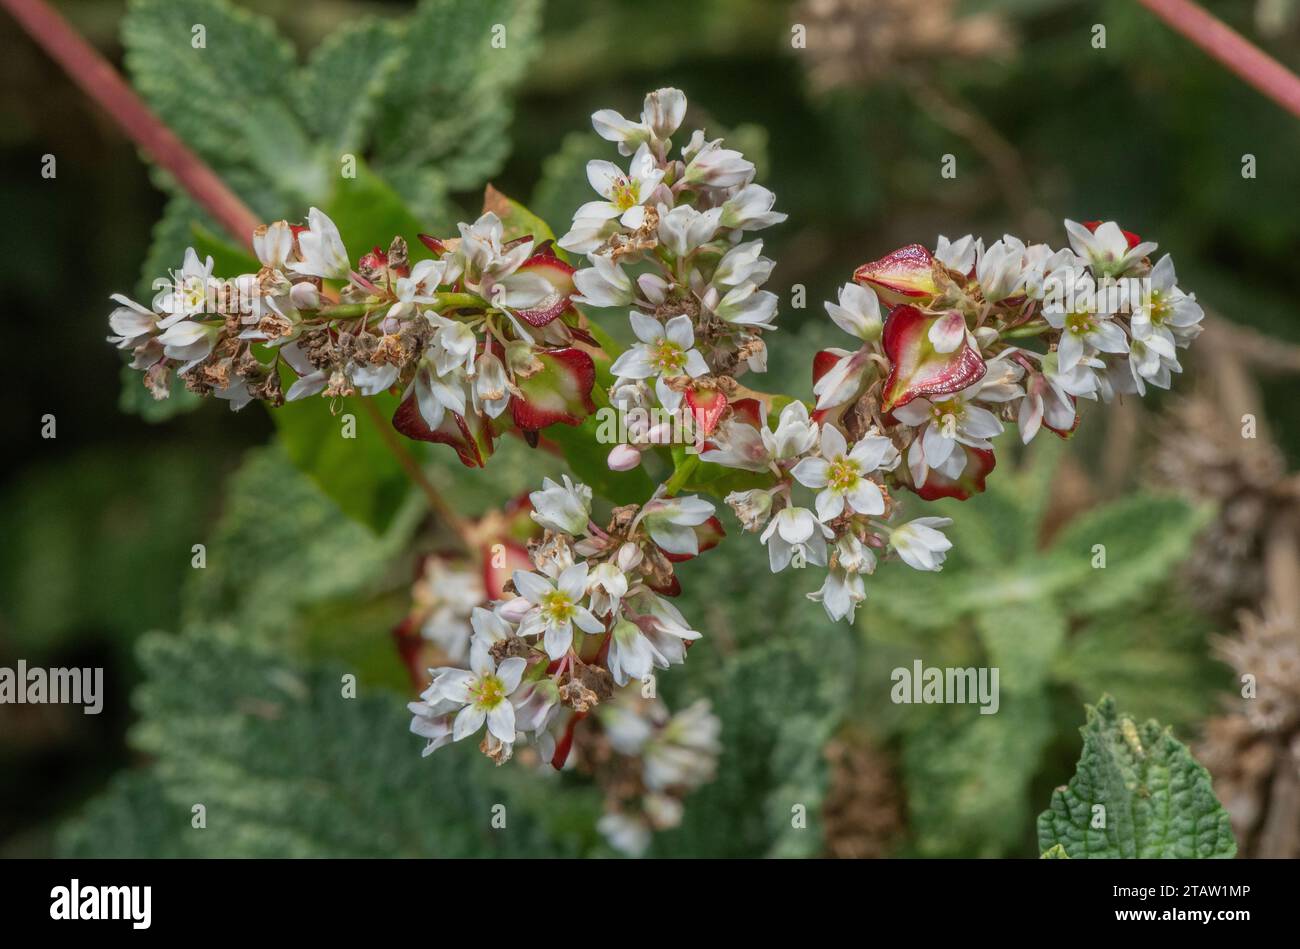 Buckwheat, Fagopyrum esculentum, in flower; widely cultivated as a gluten-free cereal alternative. Stock Photo